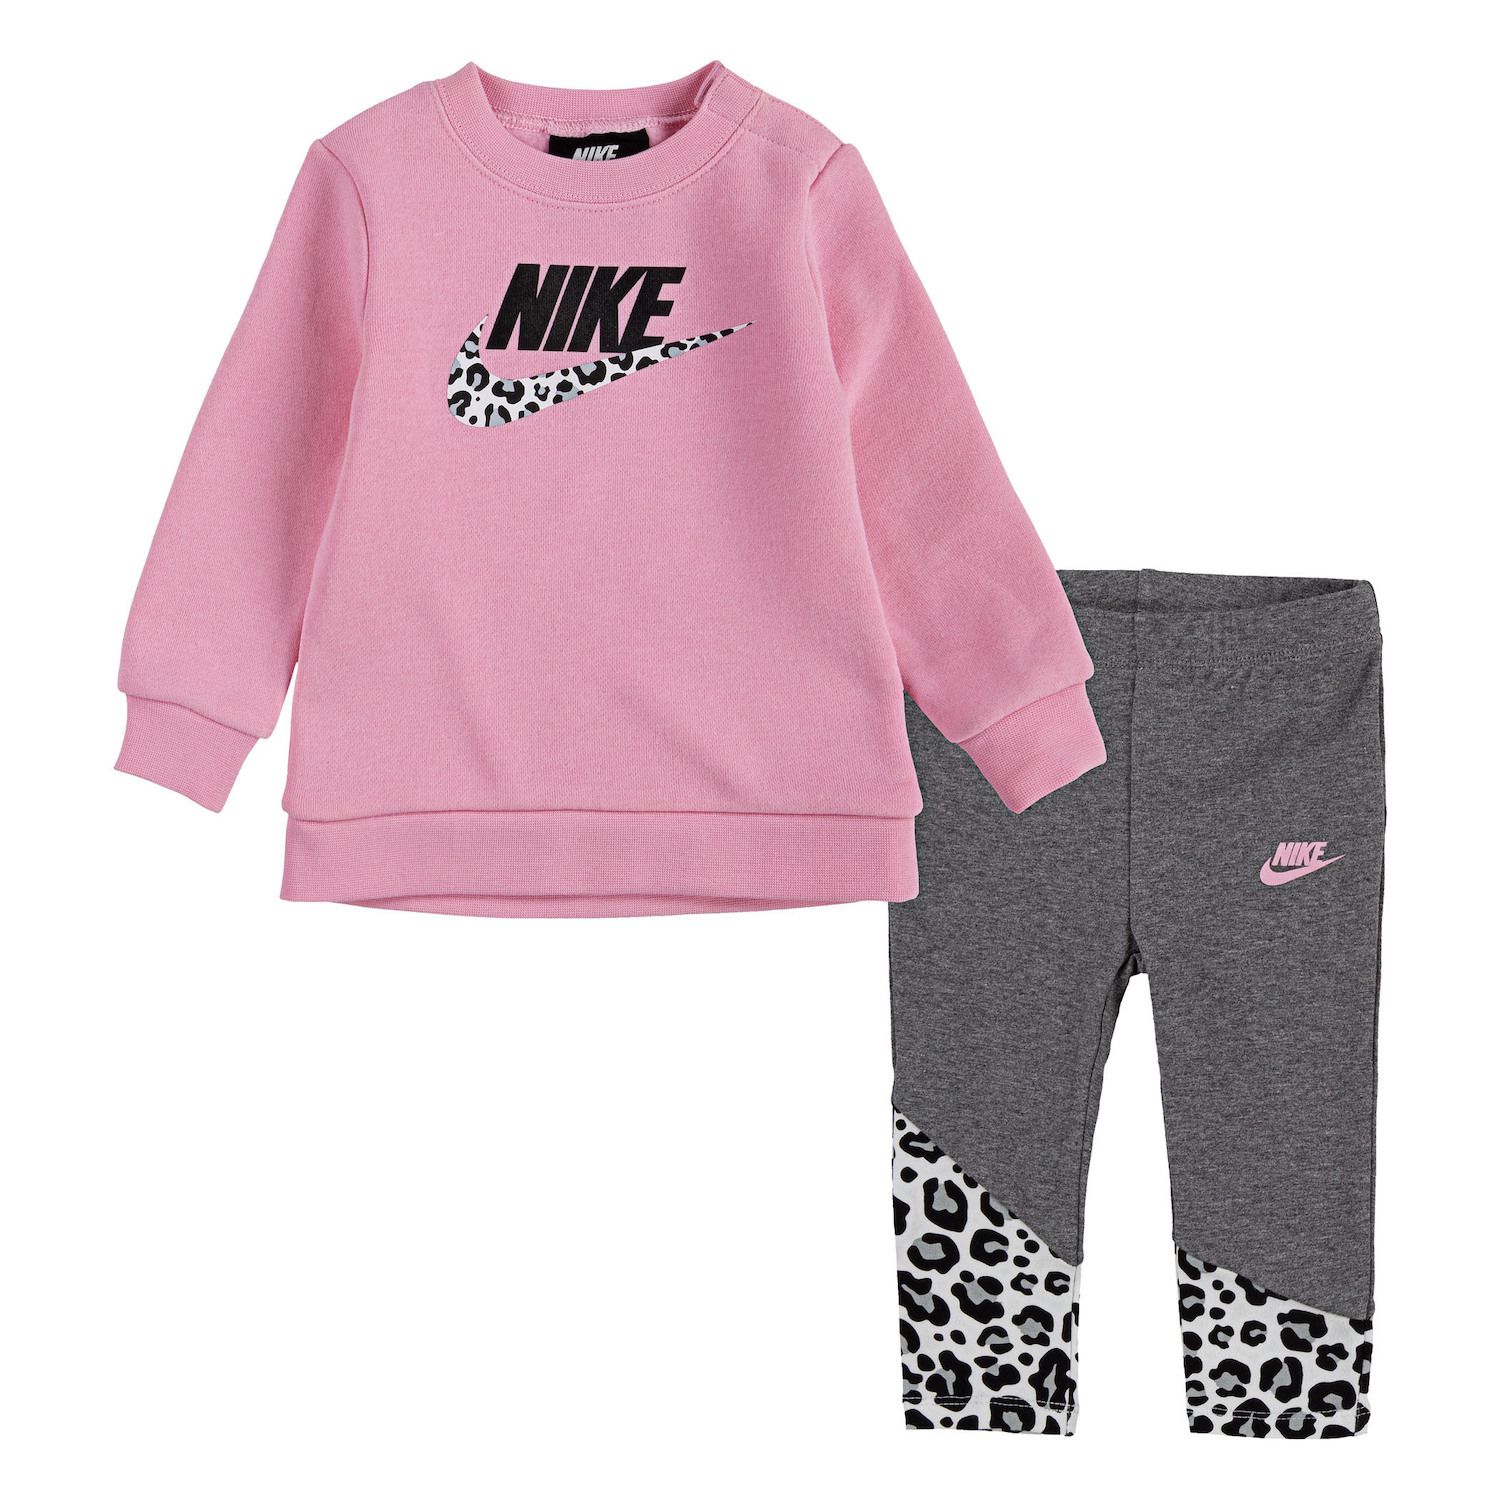 5t nike outfits